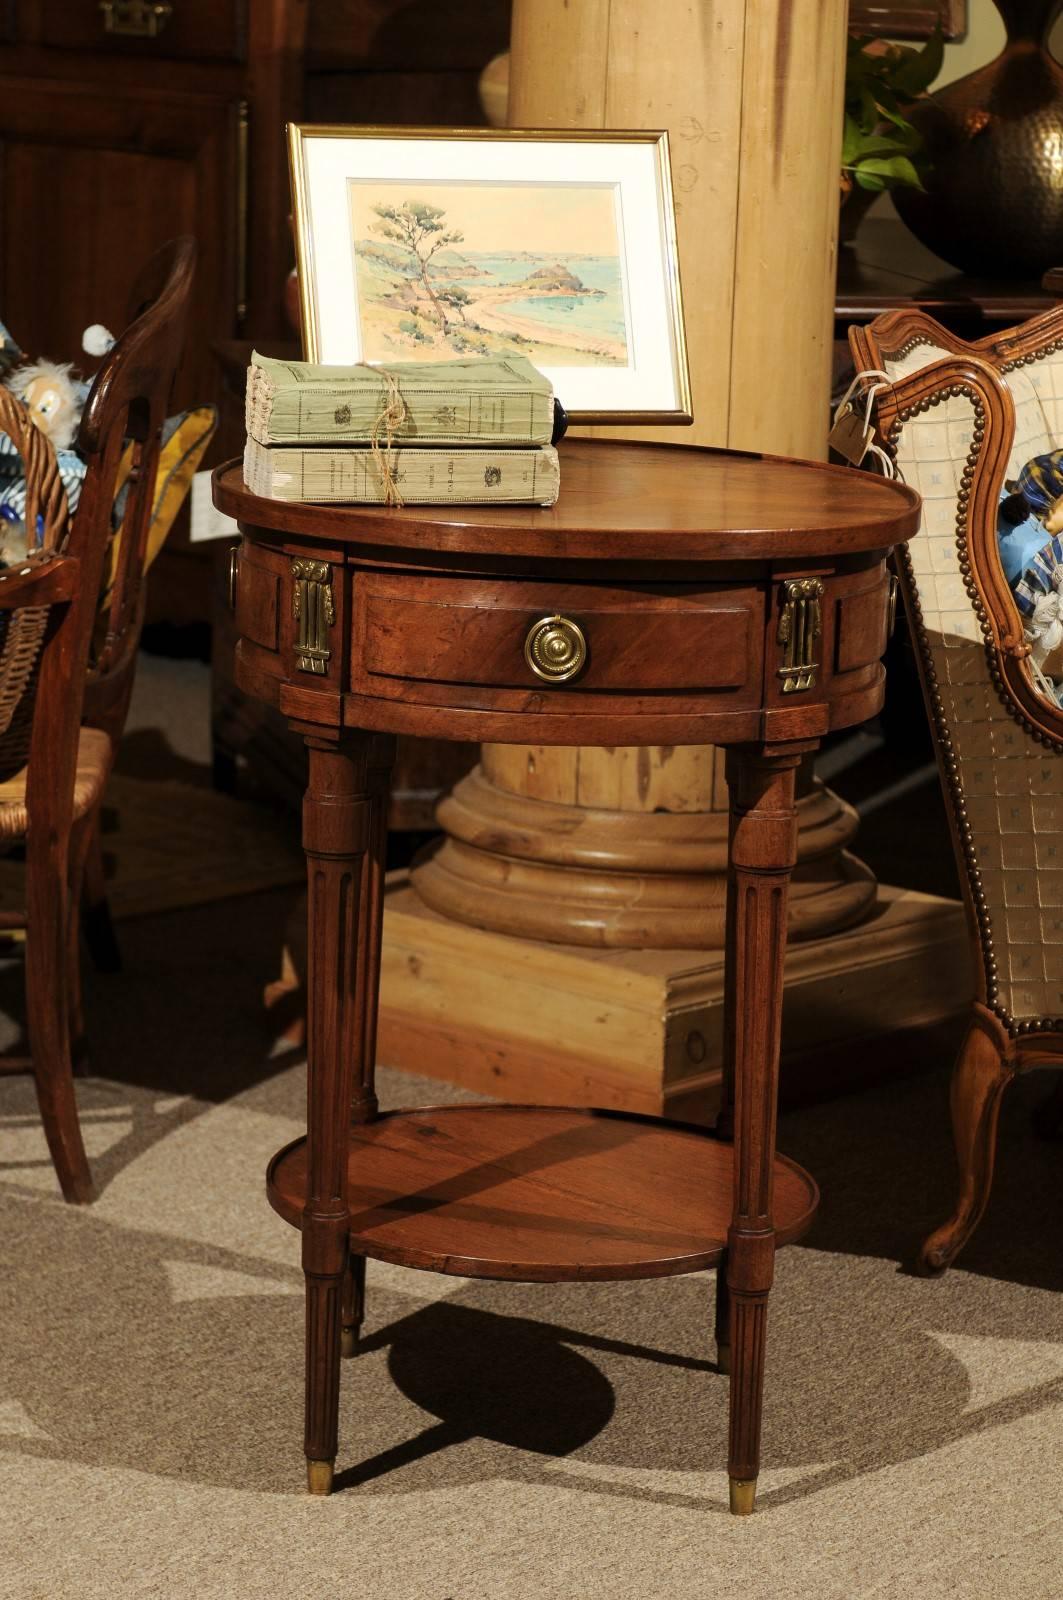 19th century walnut Louis XVI style Gueridon, circa 1880
This dainty little gueridon is so useful and just a little dressy. It has one drawer and three false drawers. The pulls and decorative pieces which adorn the apron are bronze. The walnut is a